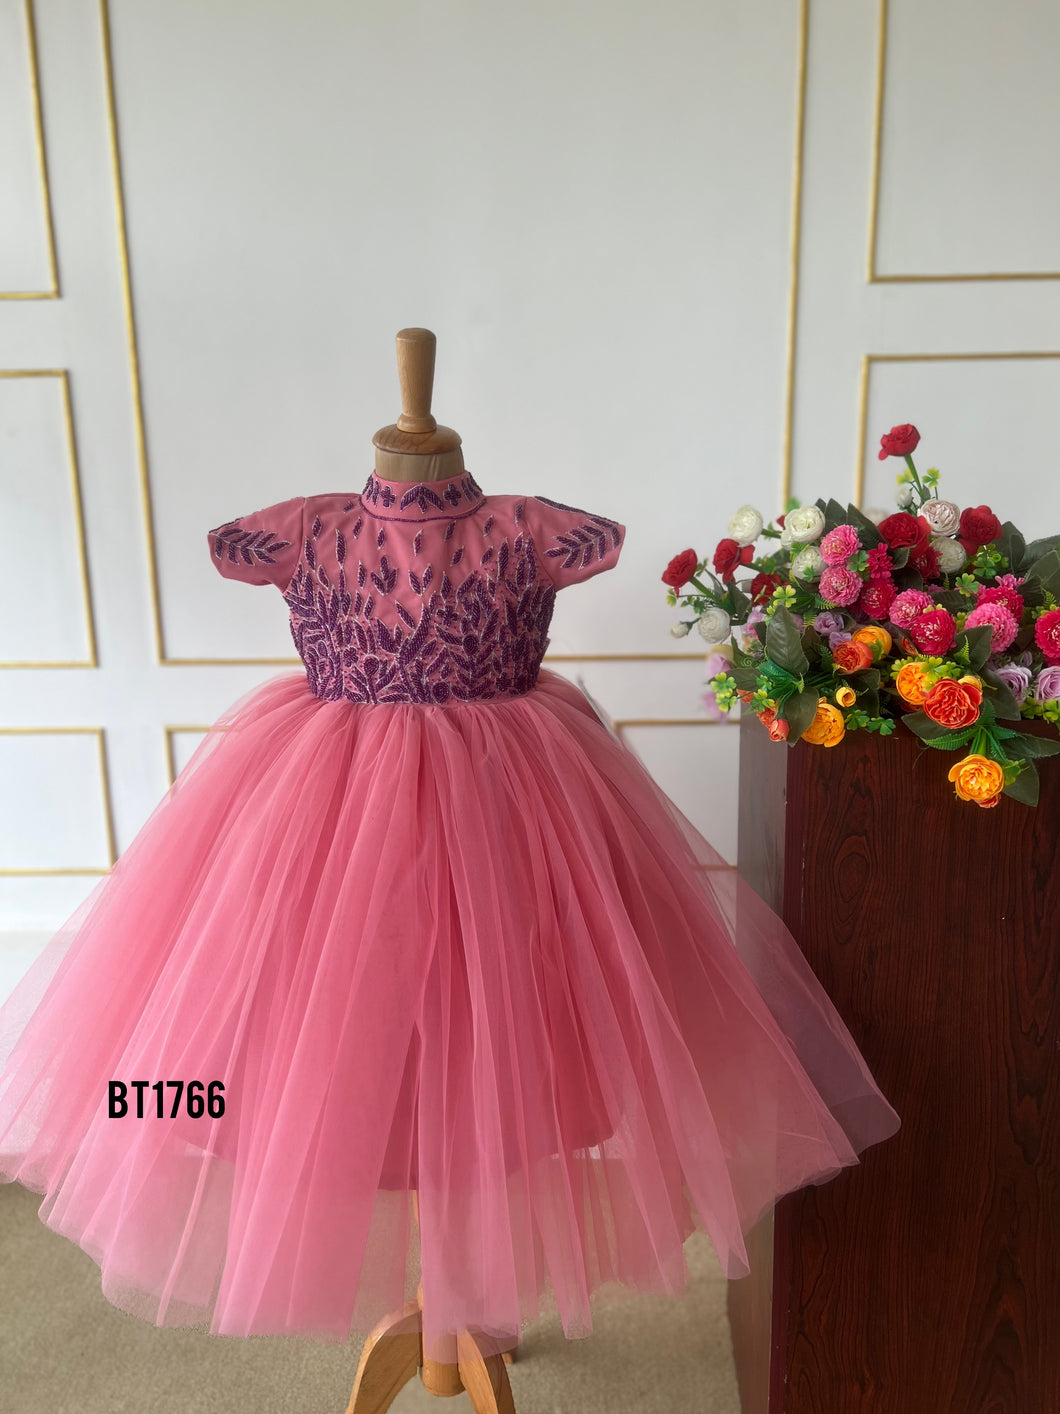 BT1766  Majestic Pink Celebration Gown - Every Moment Treasured